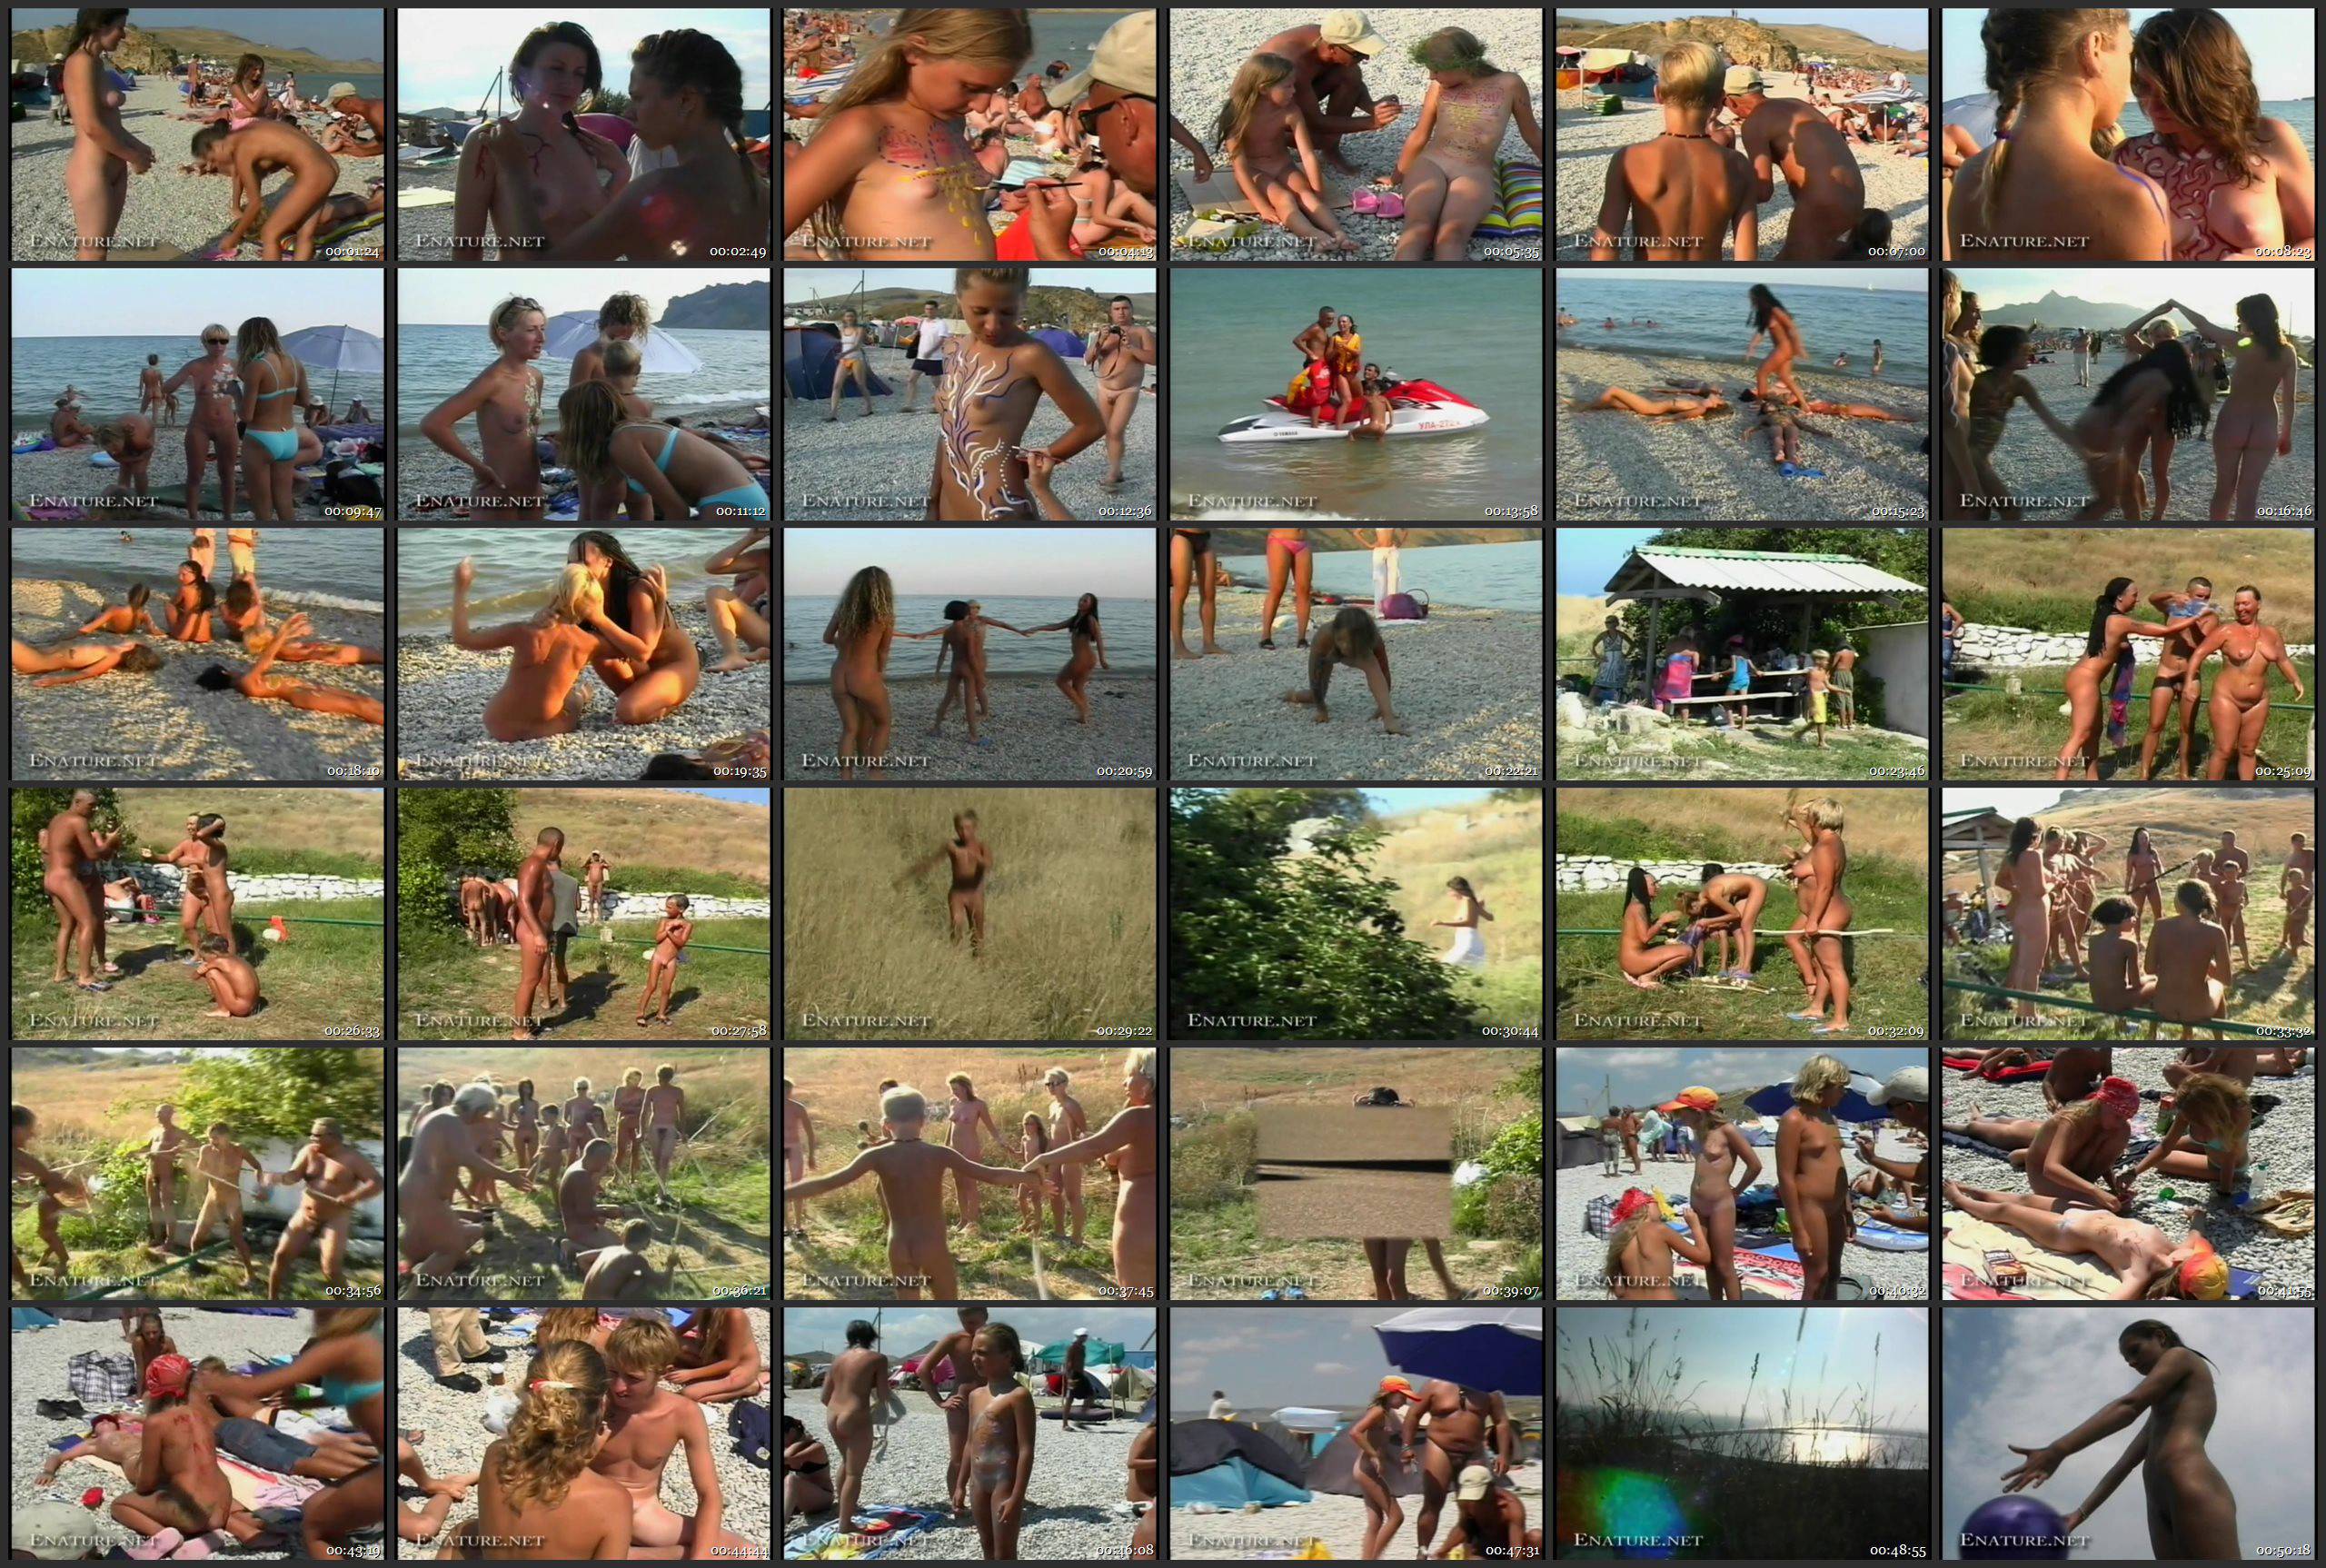 RussianBare and Enature Videos Carnival In Koktebel - Thumbnails